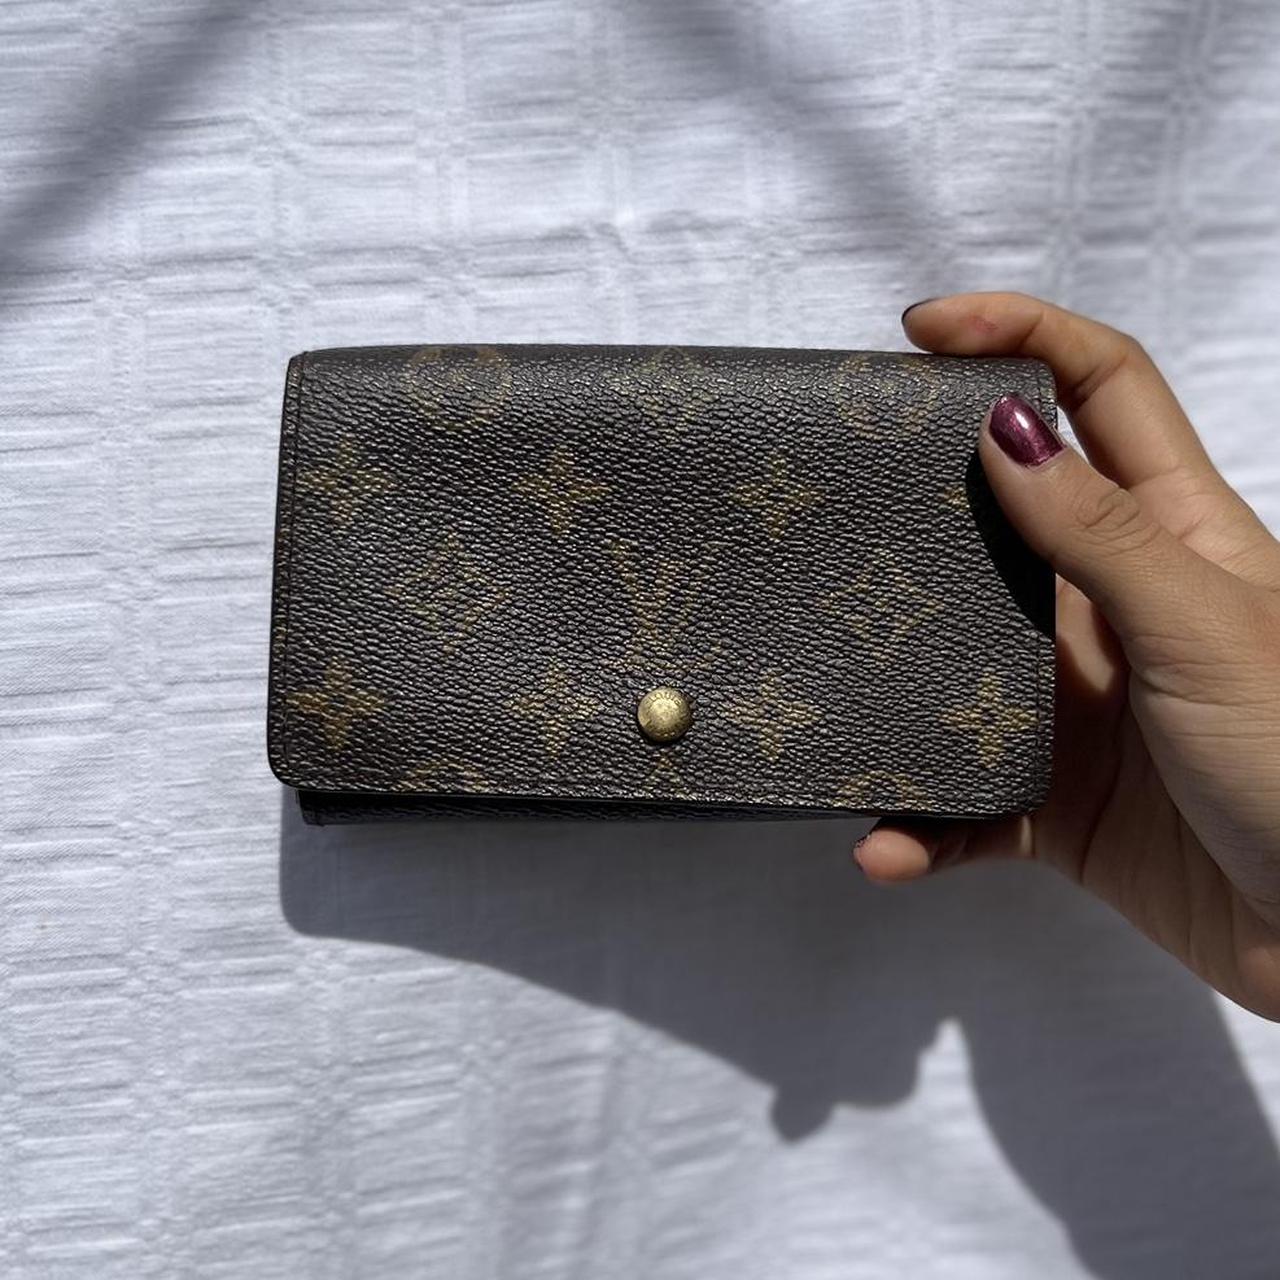 Louis Vuitton - Wallets, Authentic Used Bags & Handbags